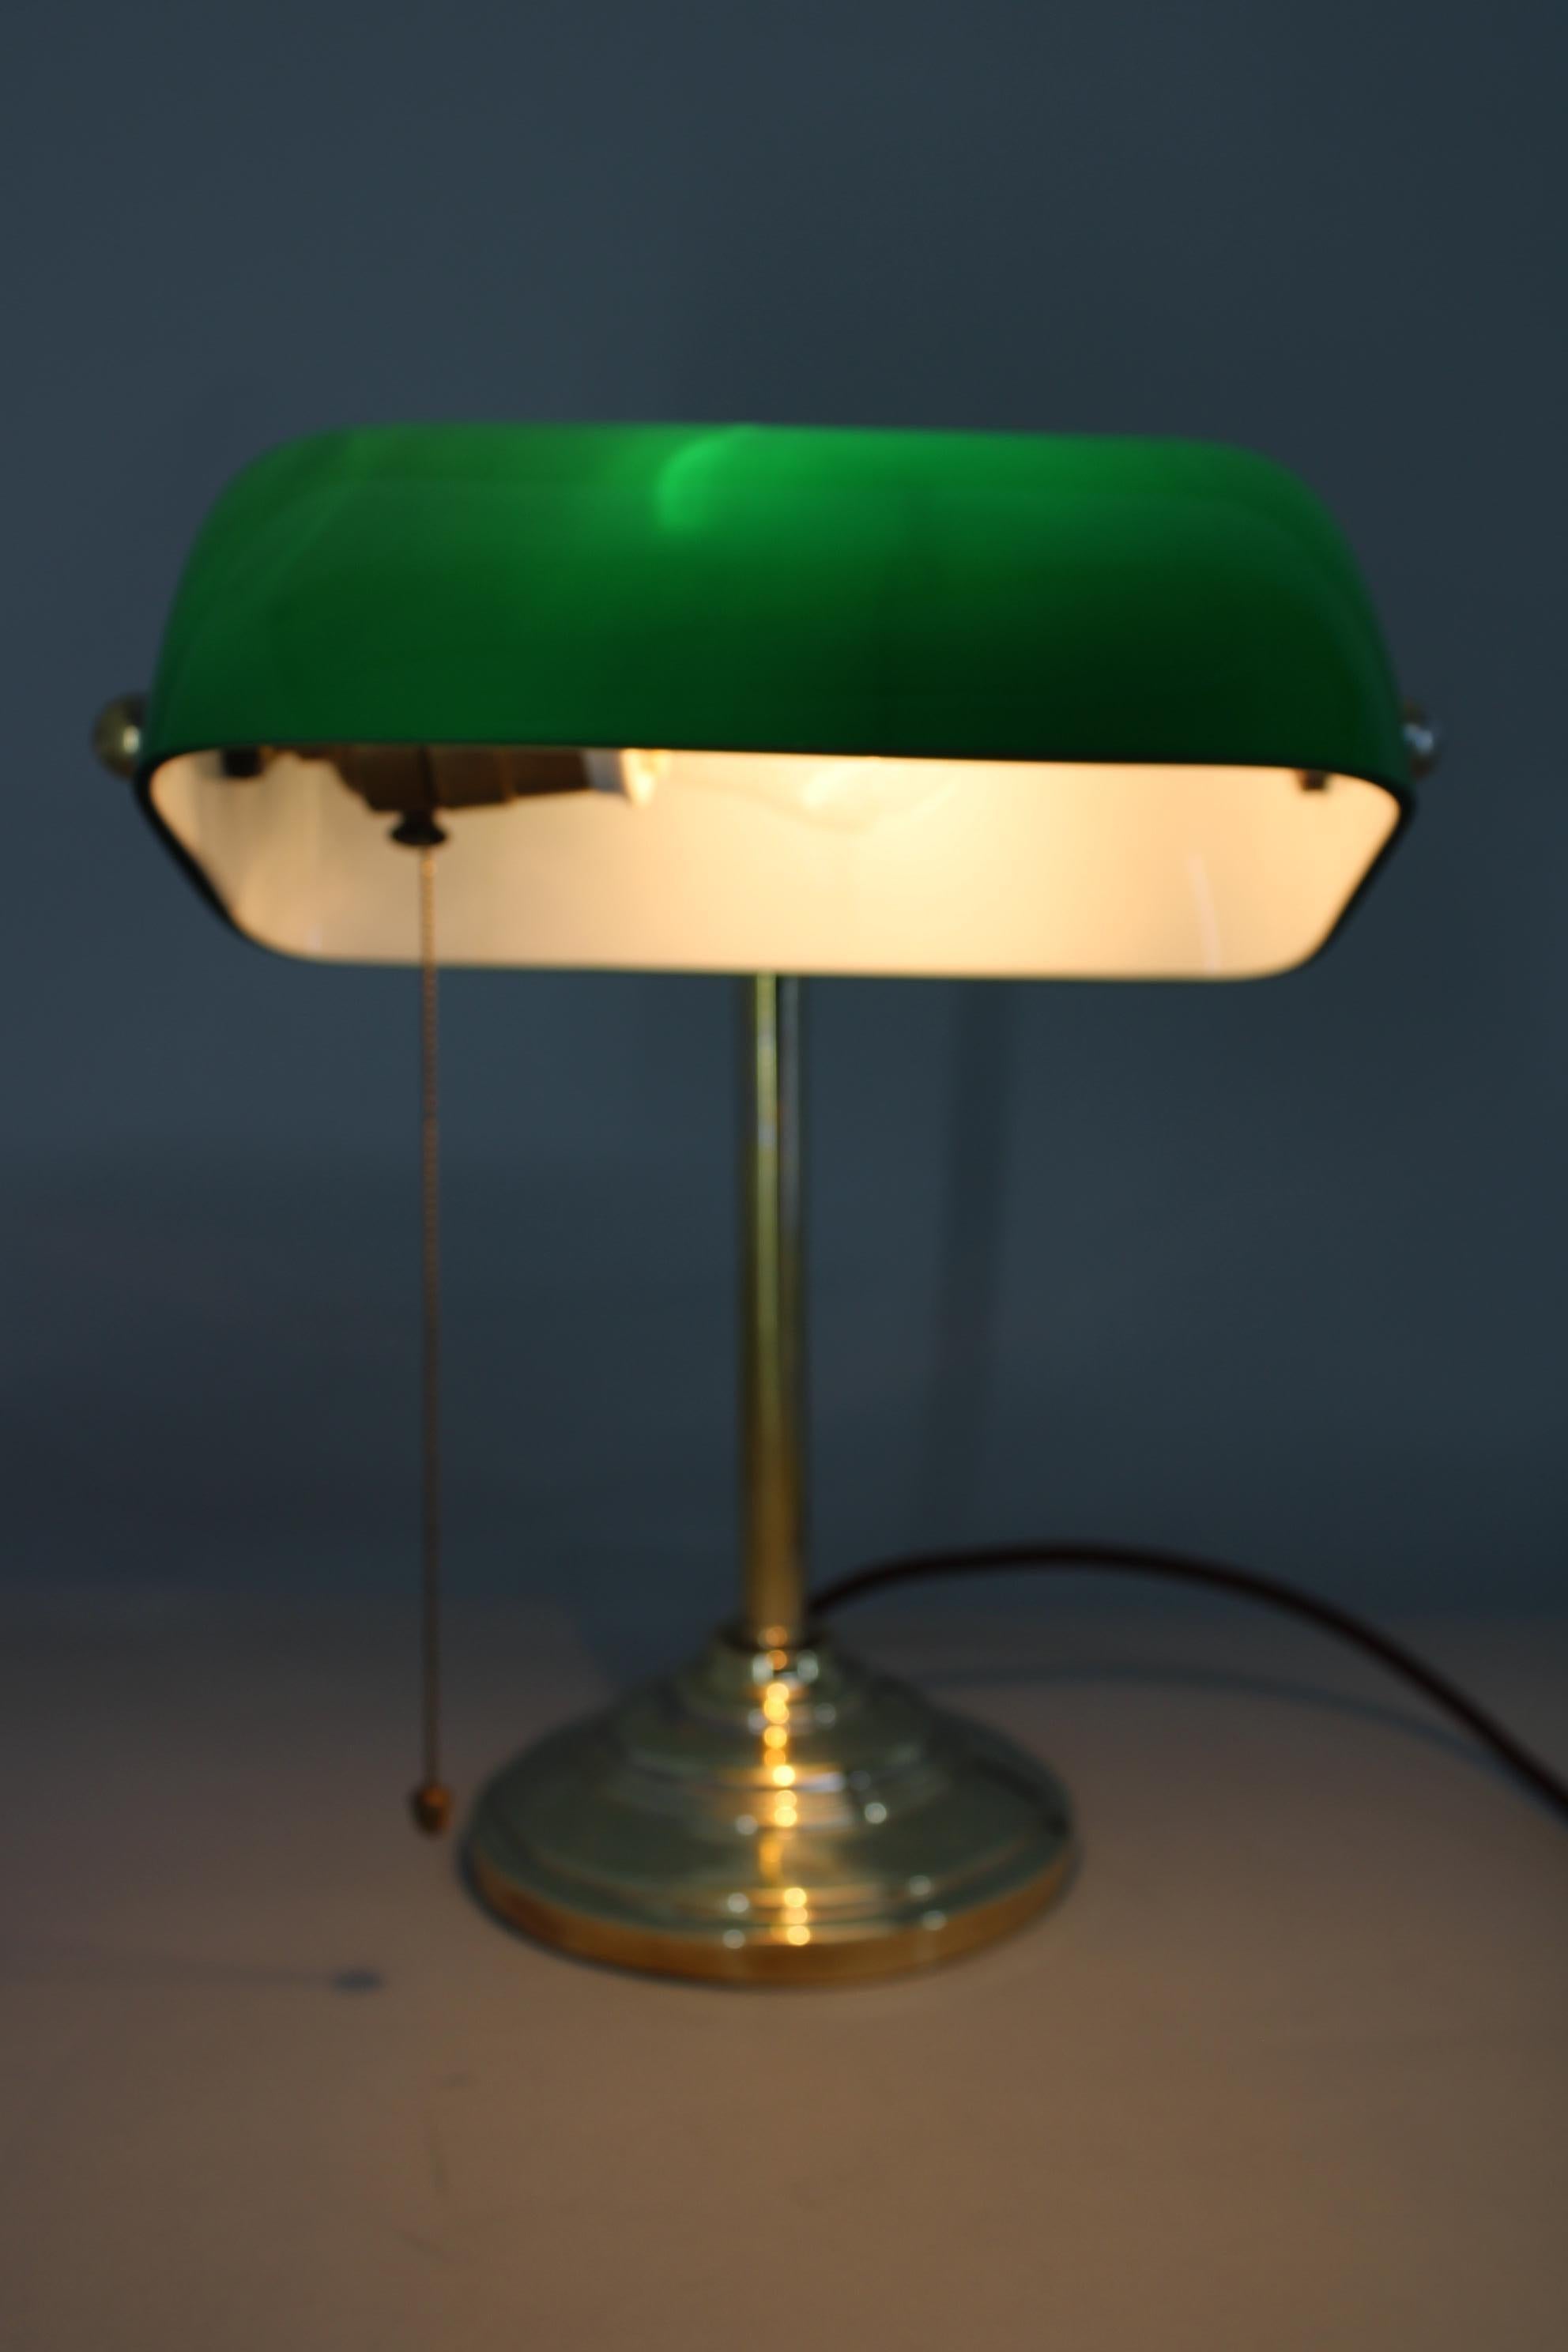 1930s Art Deco Brass  Banker Table Lamp with Glass Shade, Czechoslovakia  For Sale 7